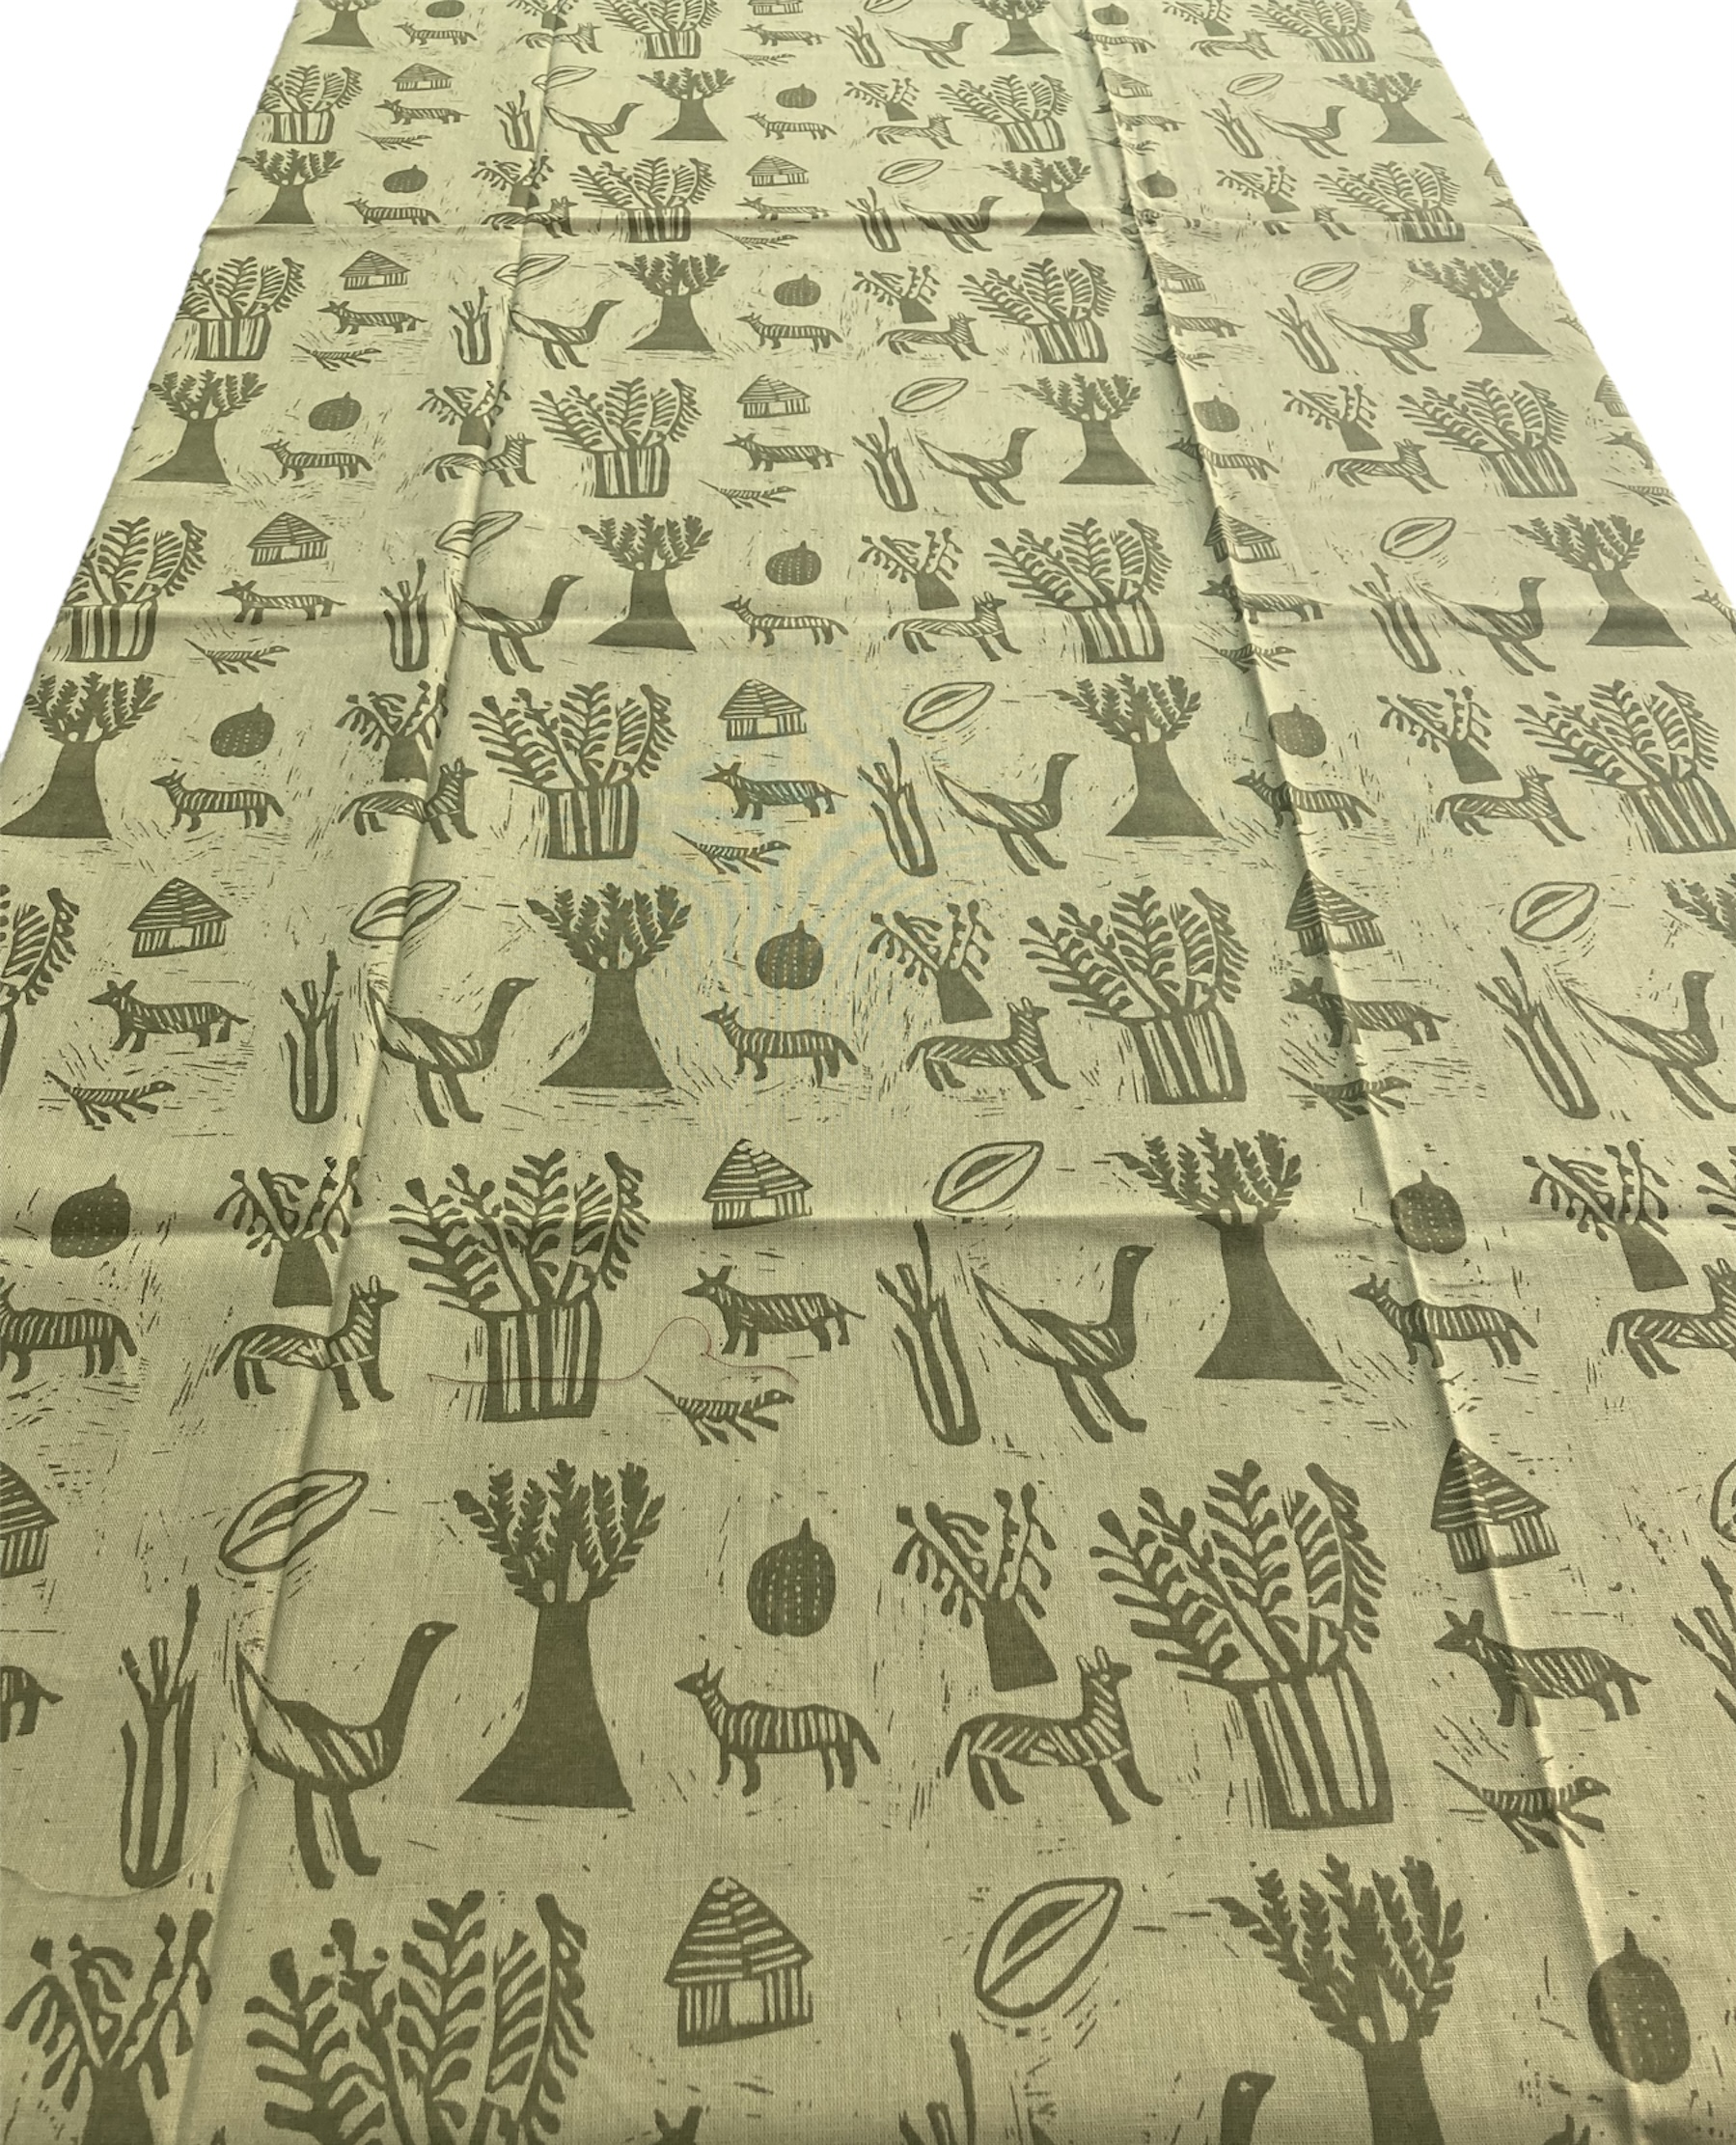 100% cotton Tablecloth approx. 79\" x 57\" from Namibia - # g10t